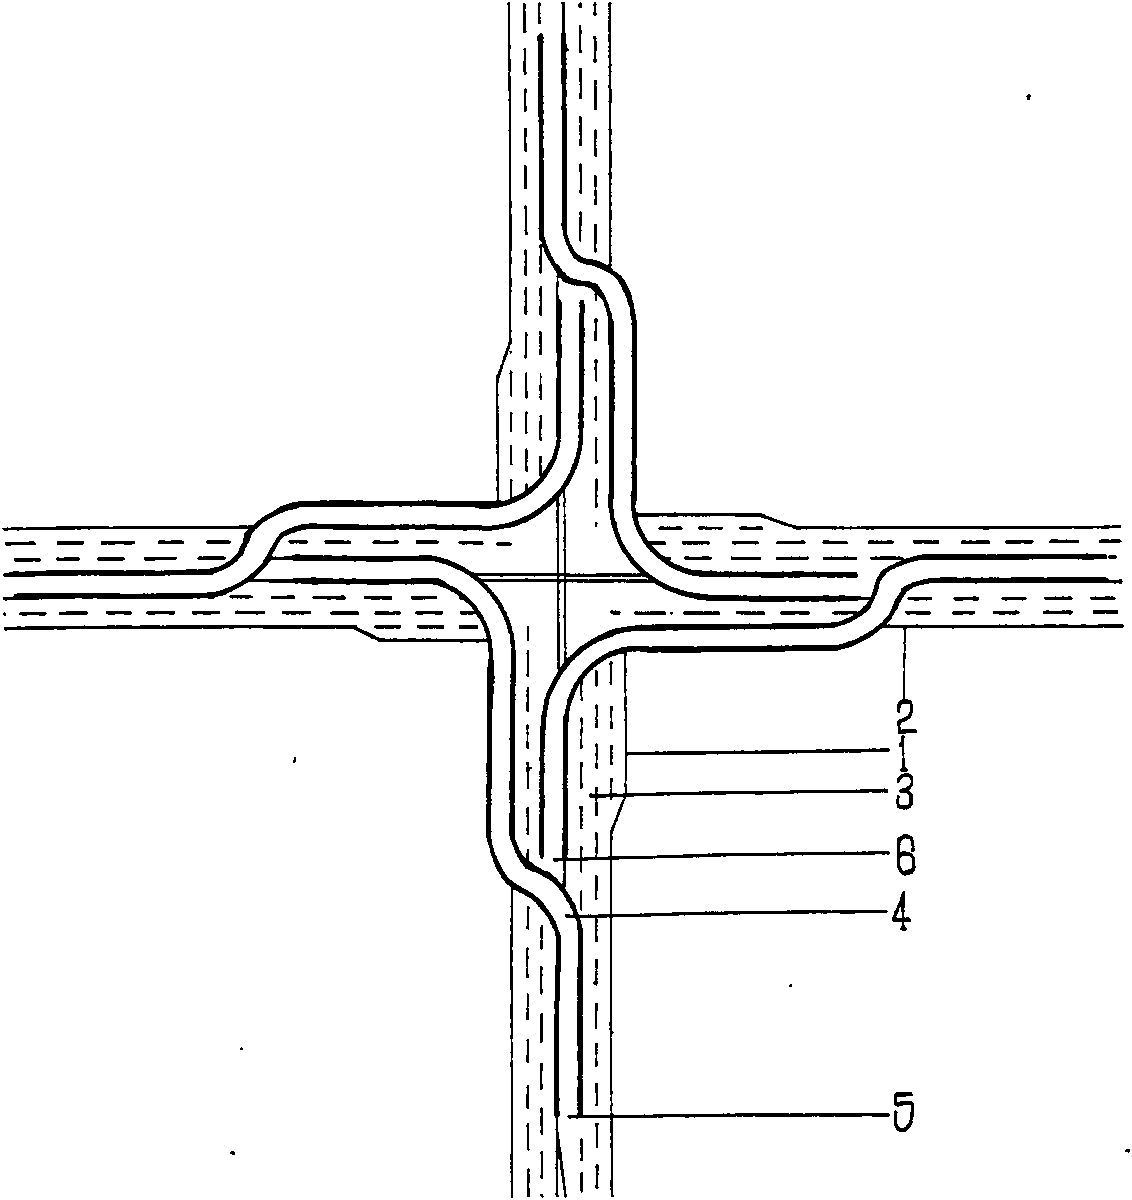 Offset intersection overpass with preposed left turning for crossroad